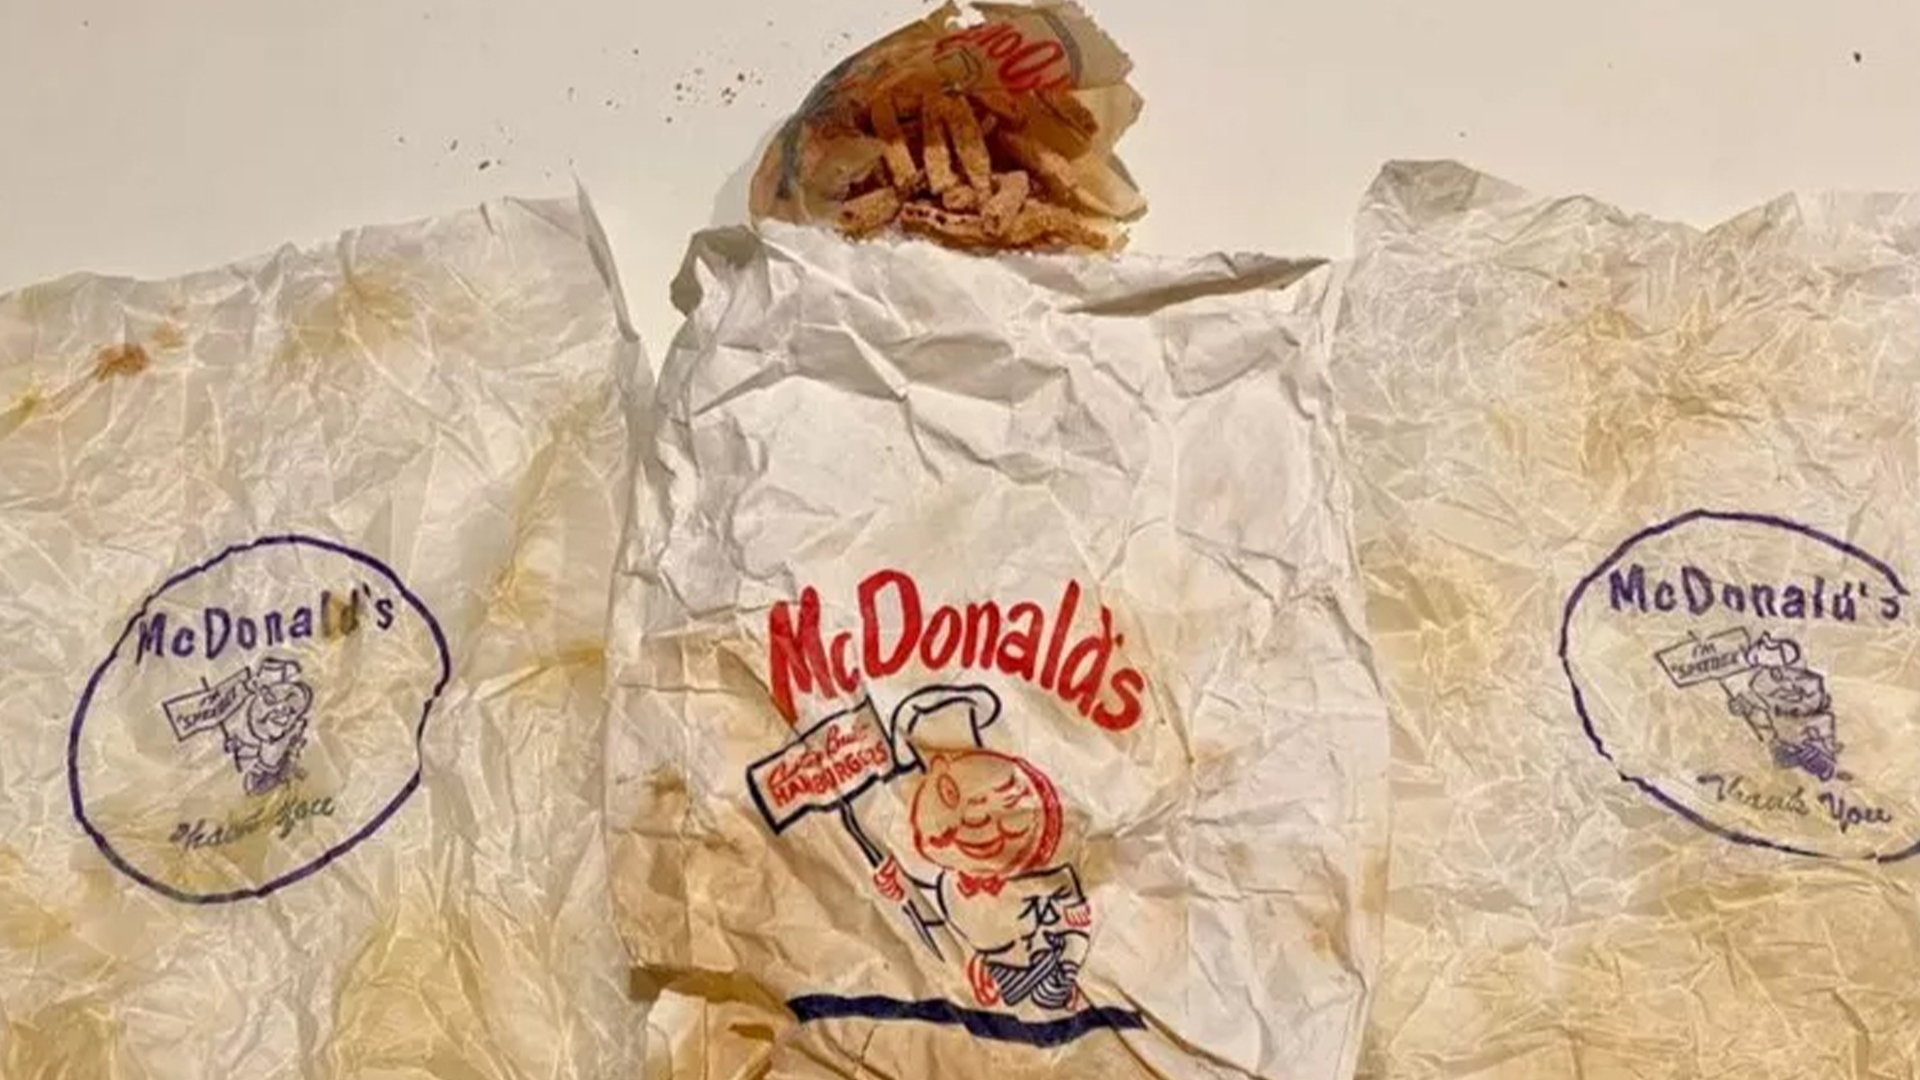 I found a 60-year-old McDonald's meal in my WALL - the smell surprised me